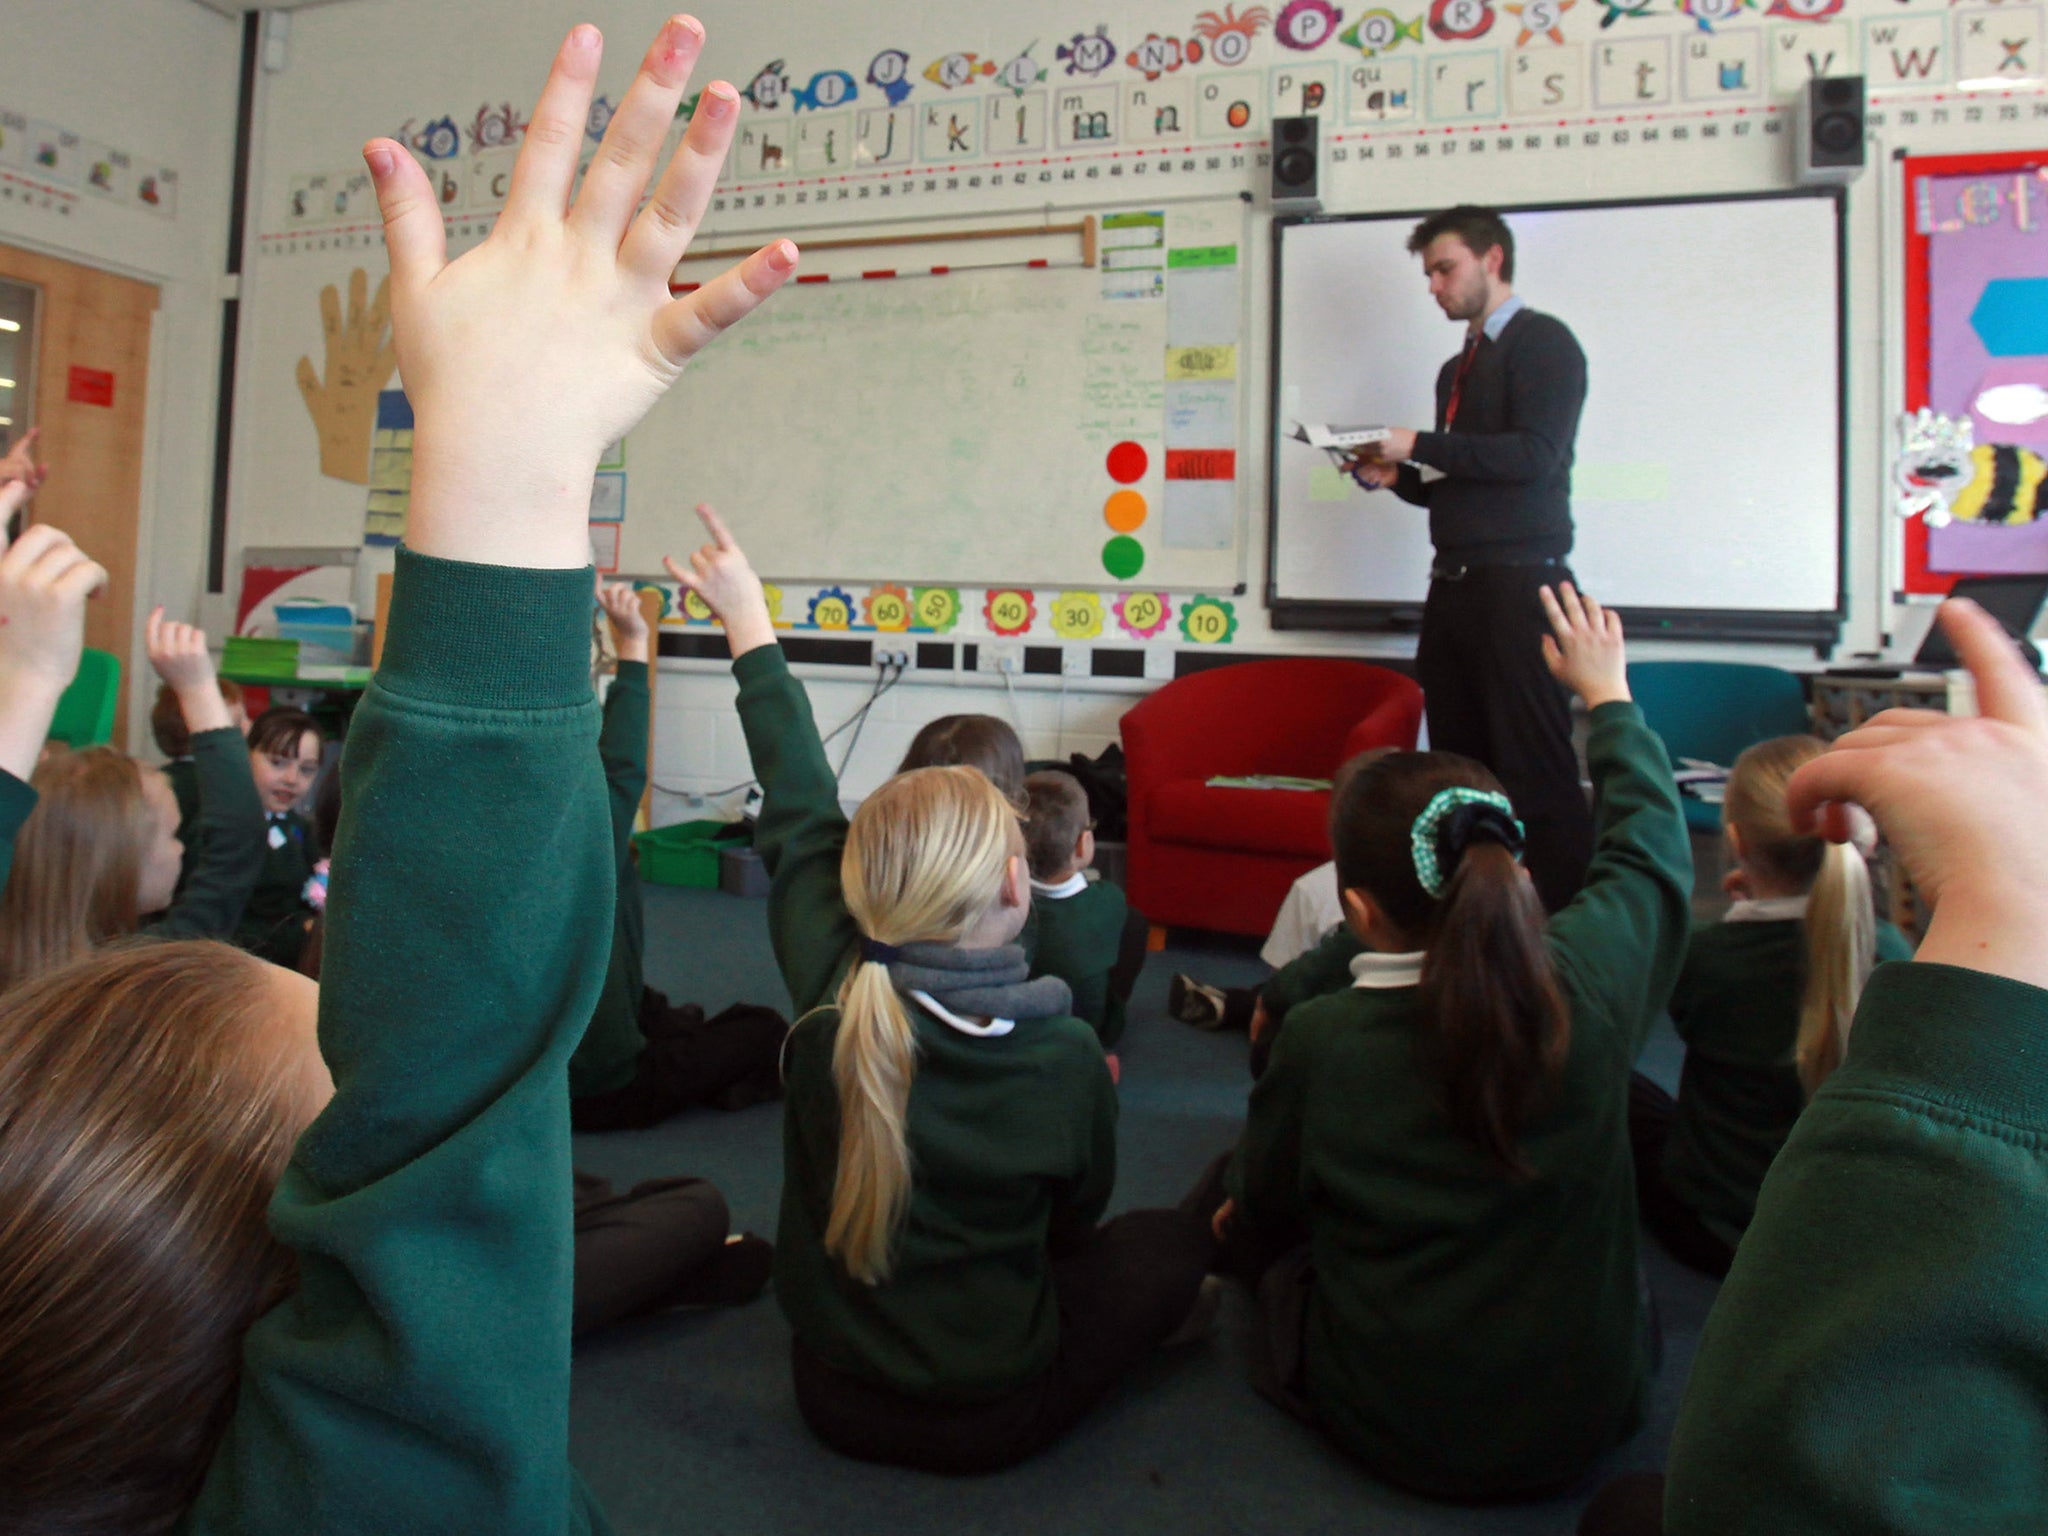 Figures show that 328 trainees who did not achieve Qualified Teacher Status were working in teaching